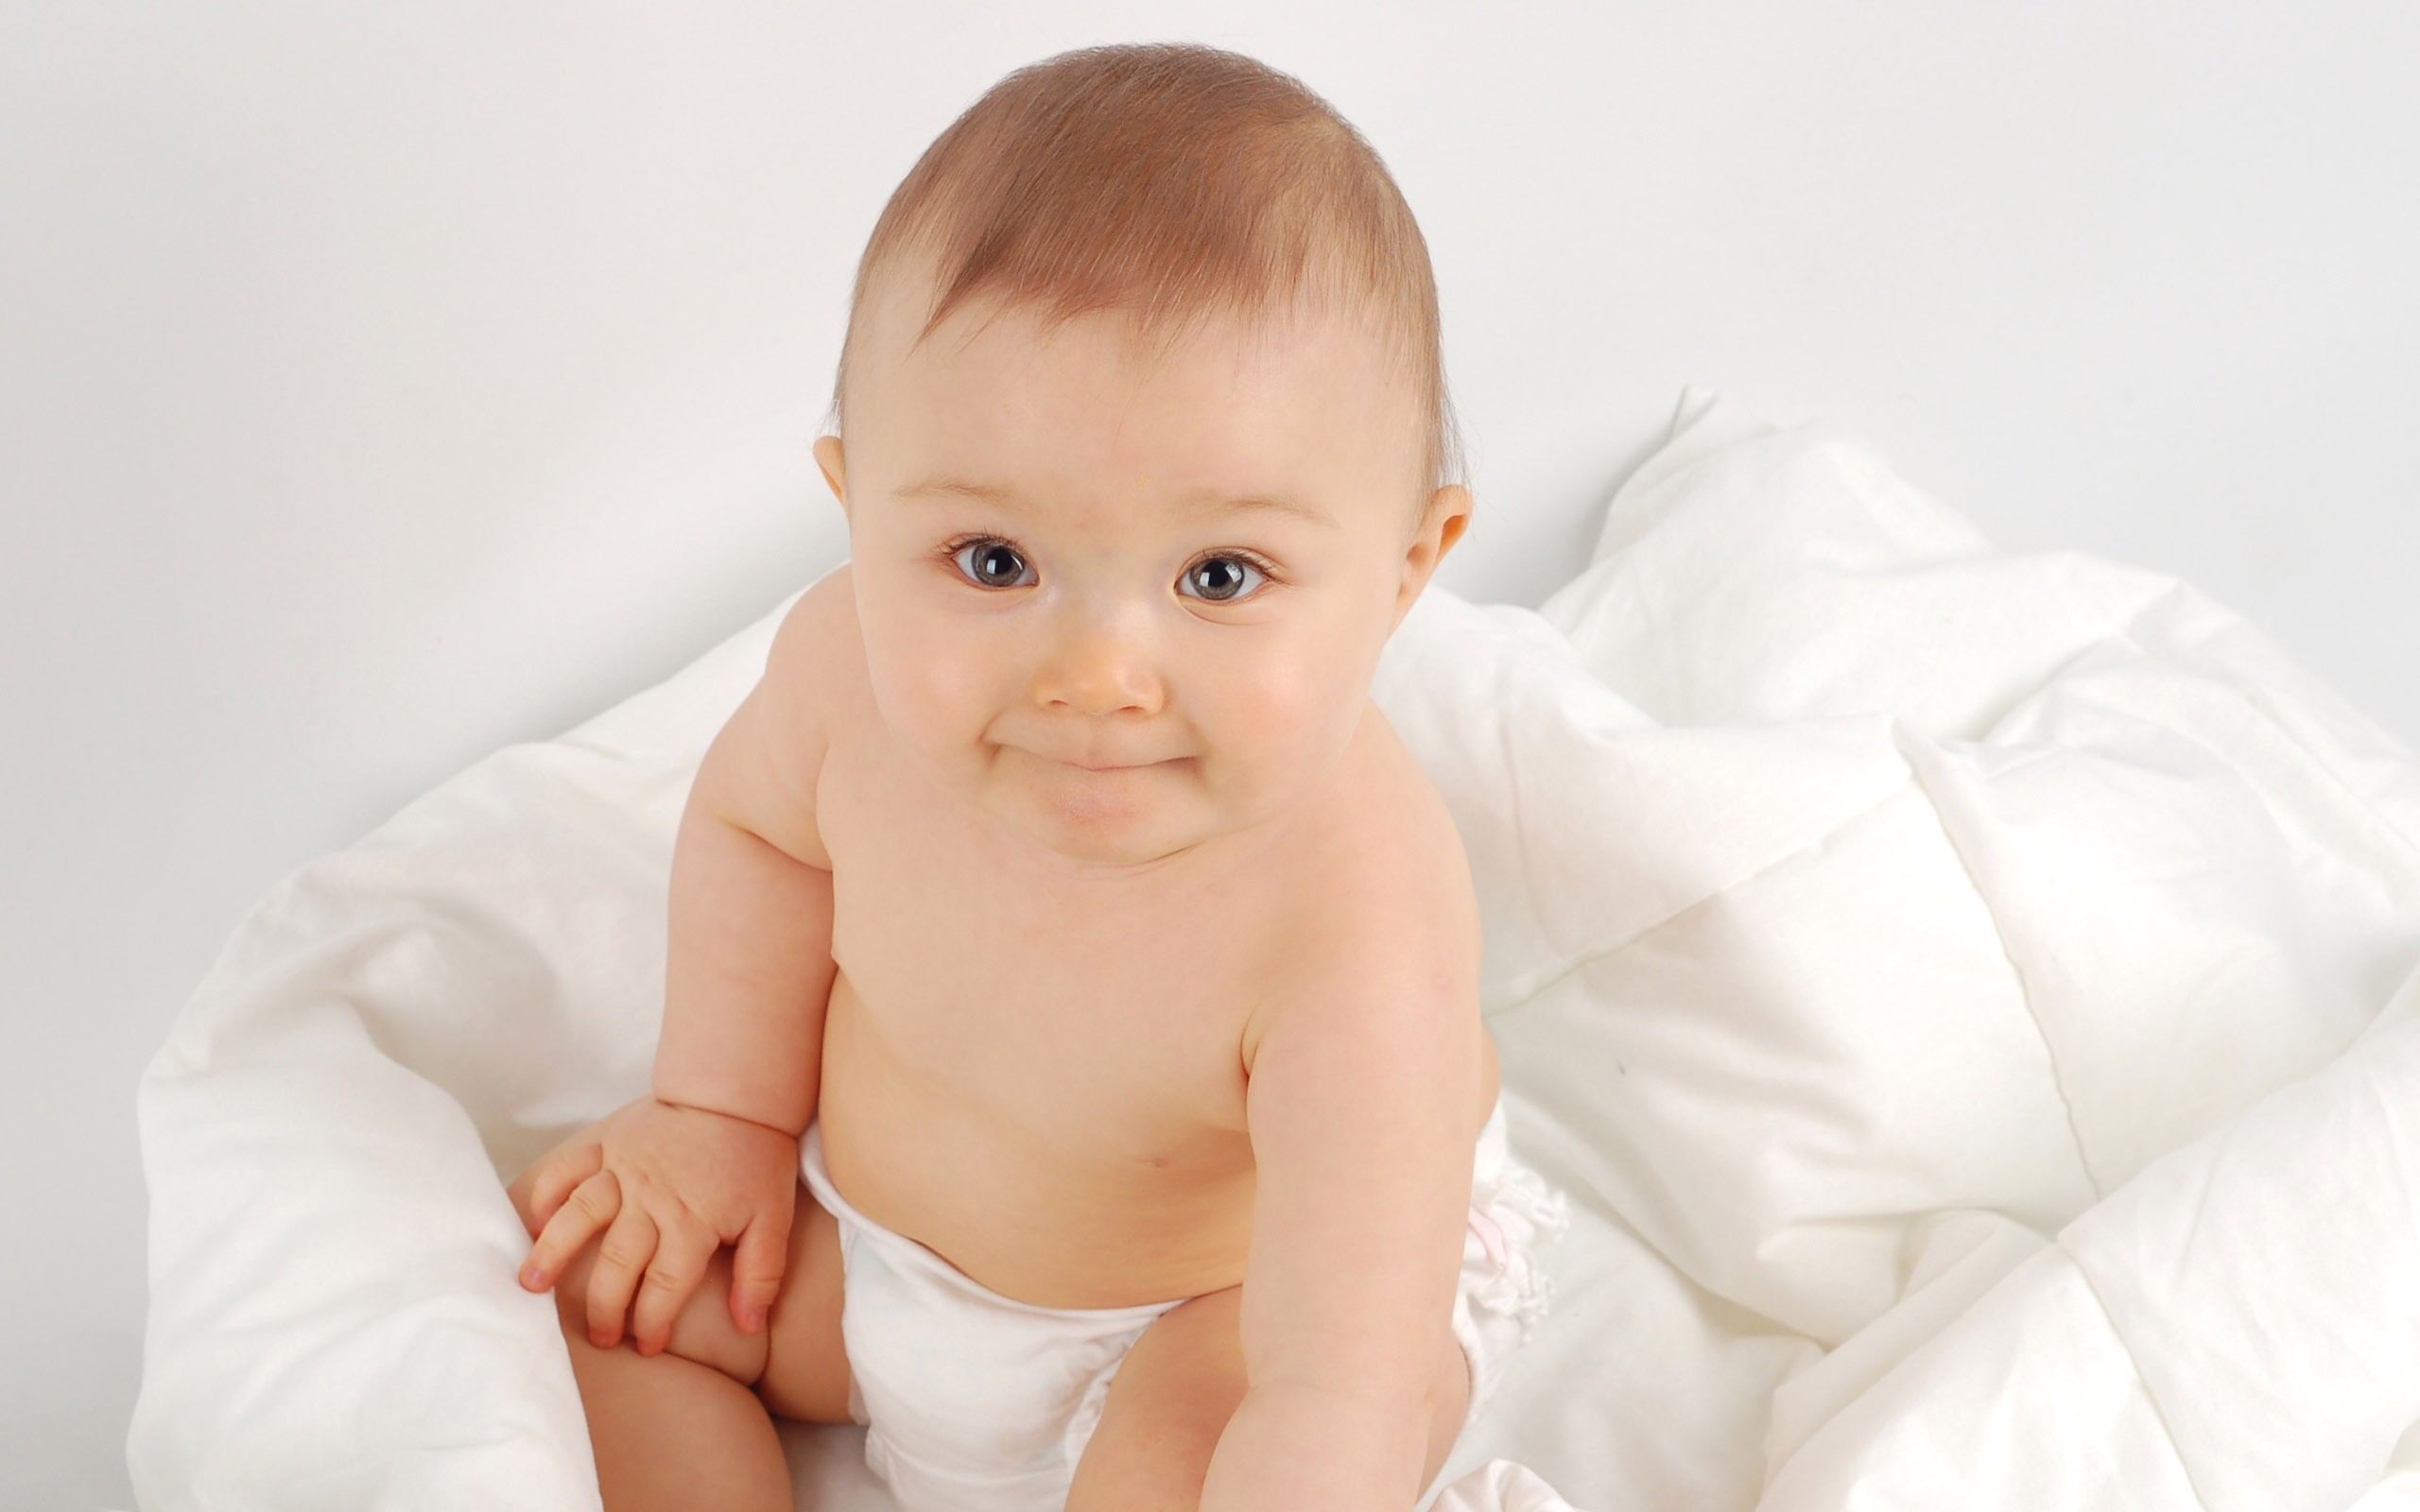 Baby cute on bed image wallpaper